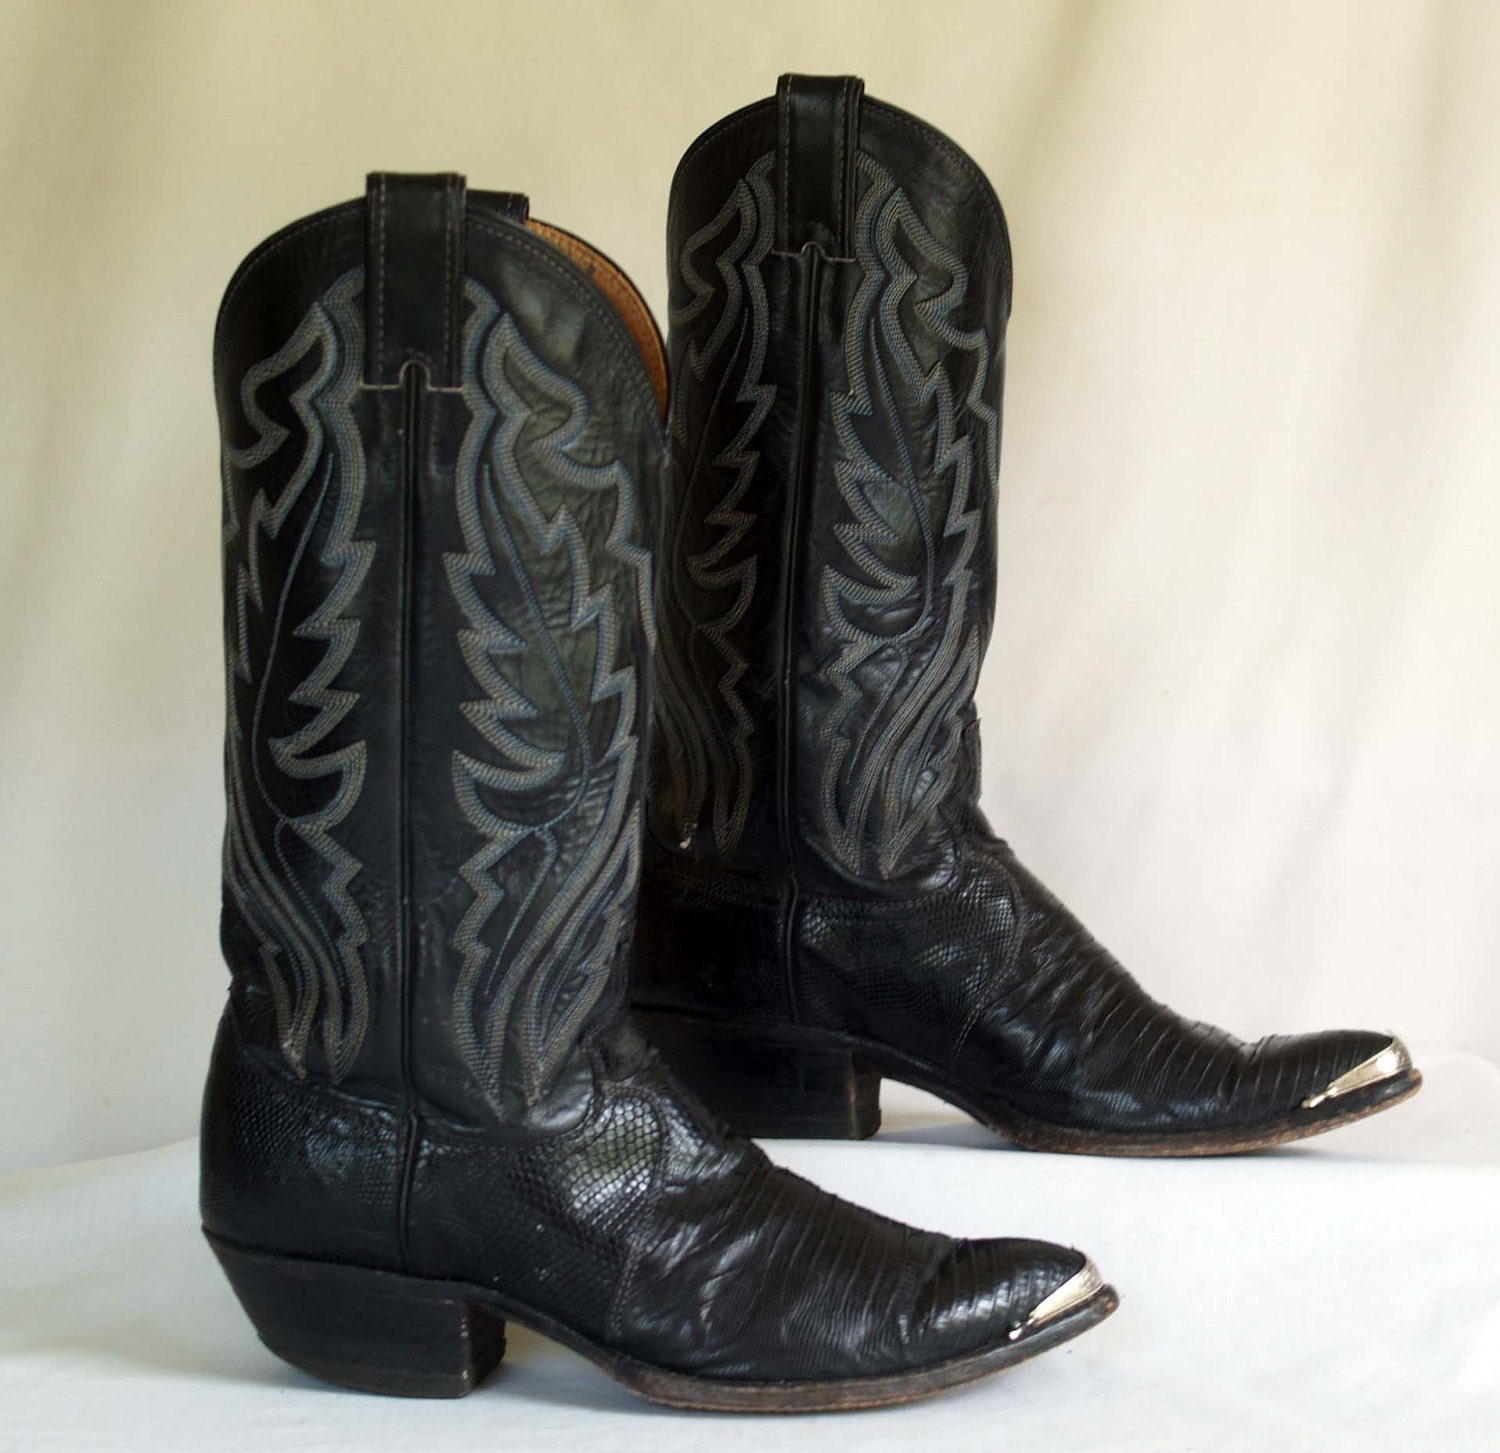 Vintage Cowboy Boots by Justin with Lizard Skin Vamp in by ShopNDG